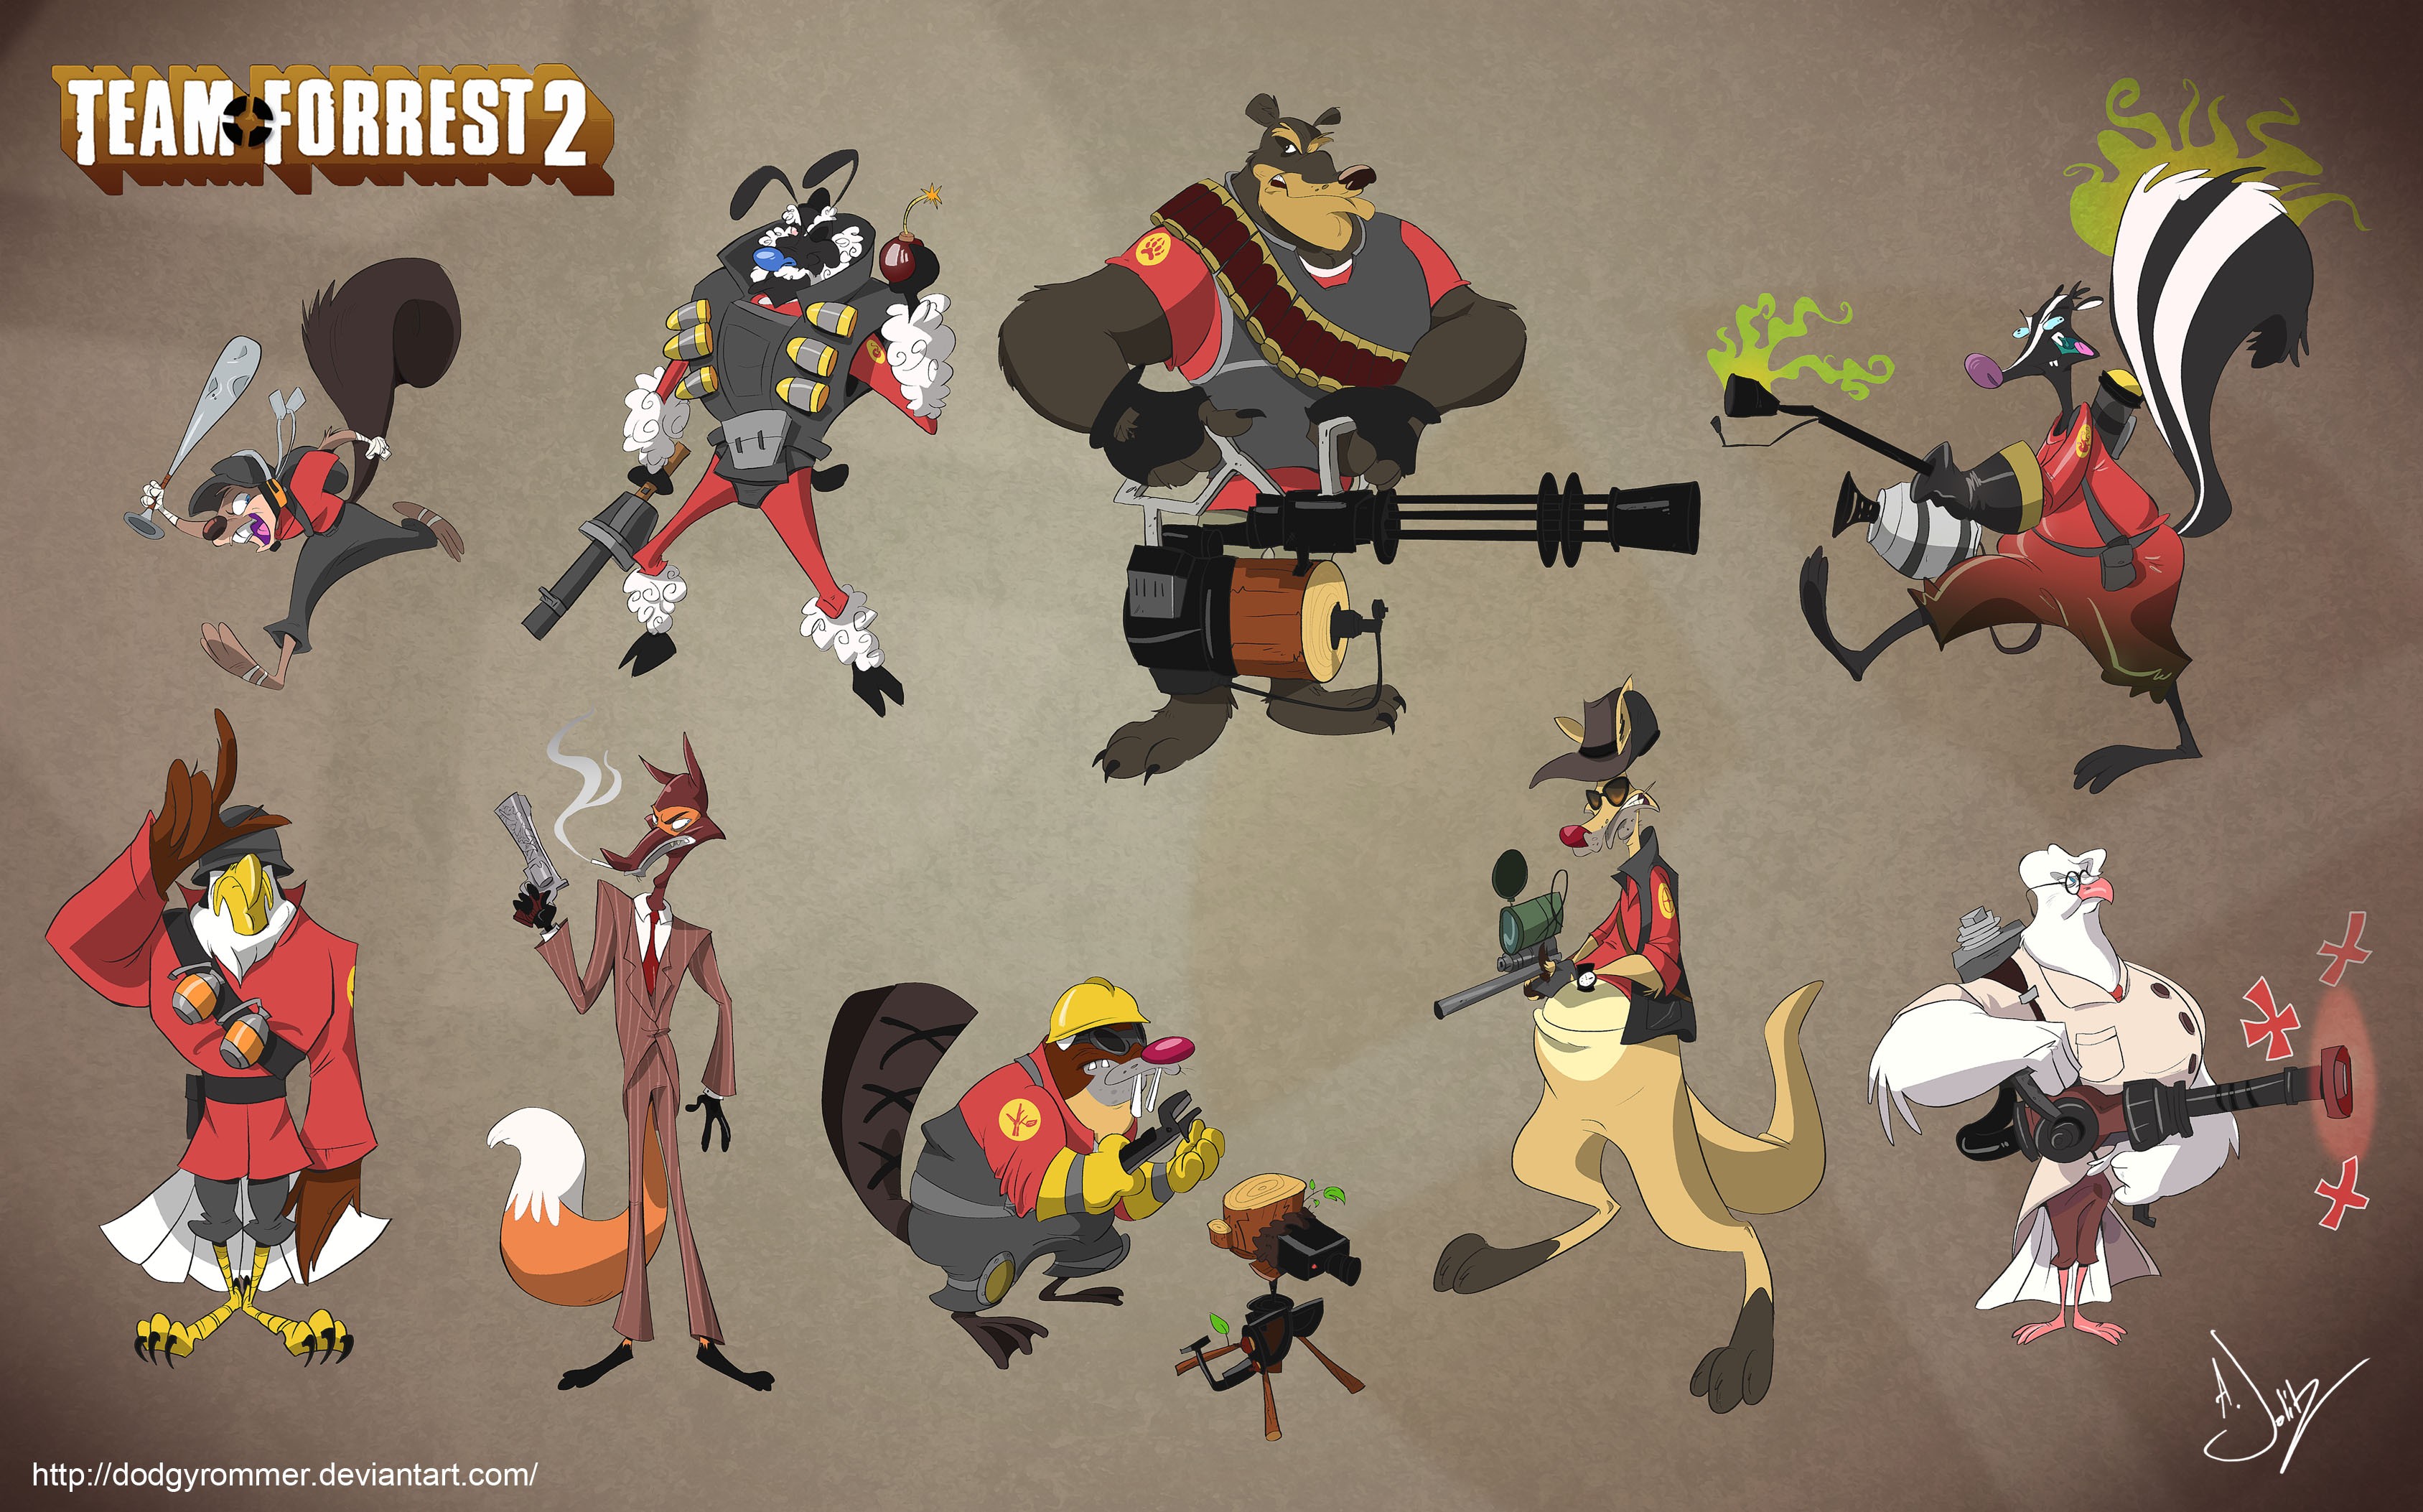 General 3375x2106 Sniper (TF2) Spy (TF2) Scout (TF2) Soldier (TF2) Medic (TF2) Heavy (TF2) Engineer (TF2) Demoman Pyro (TF2) PC gaming simple background video game characters gun DeviantArt signature digital art concept art